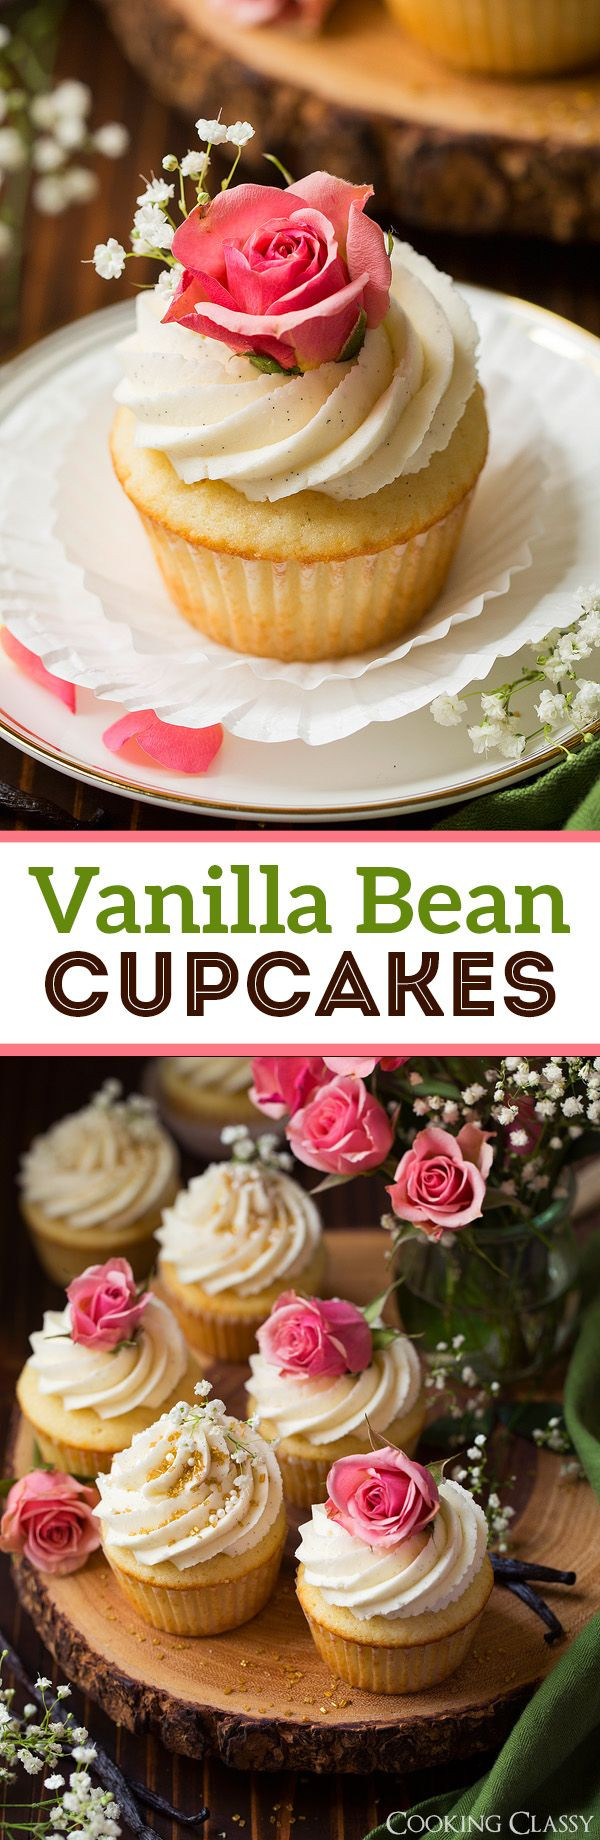 Gourmet Cupcake Recipes Using Cake Mix
 The 25 best Cupcake flavors ideas on Pinterest